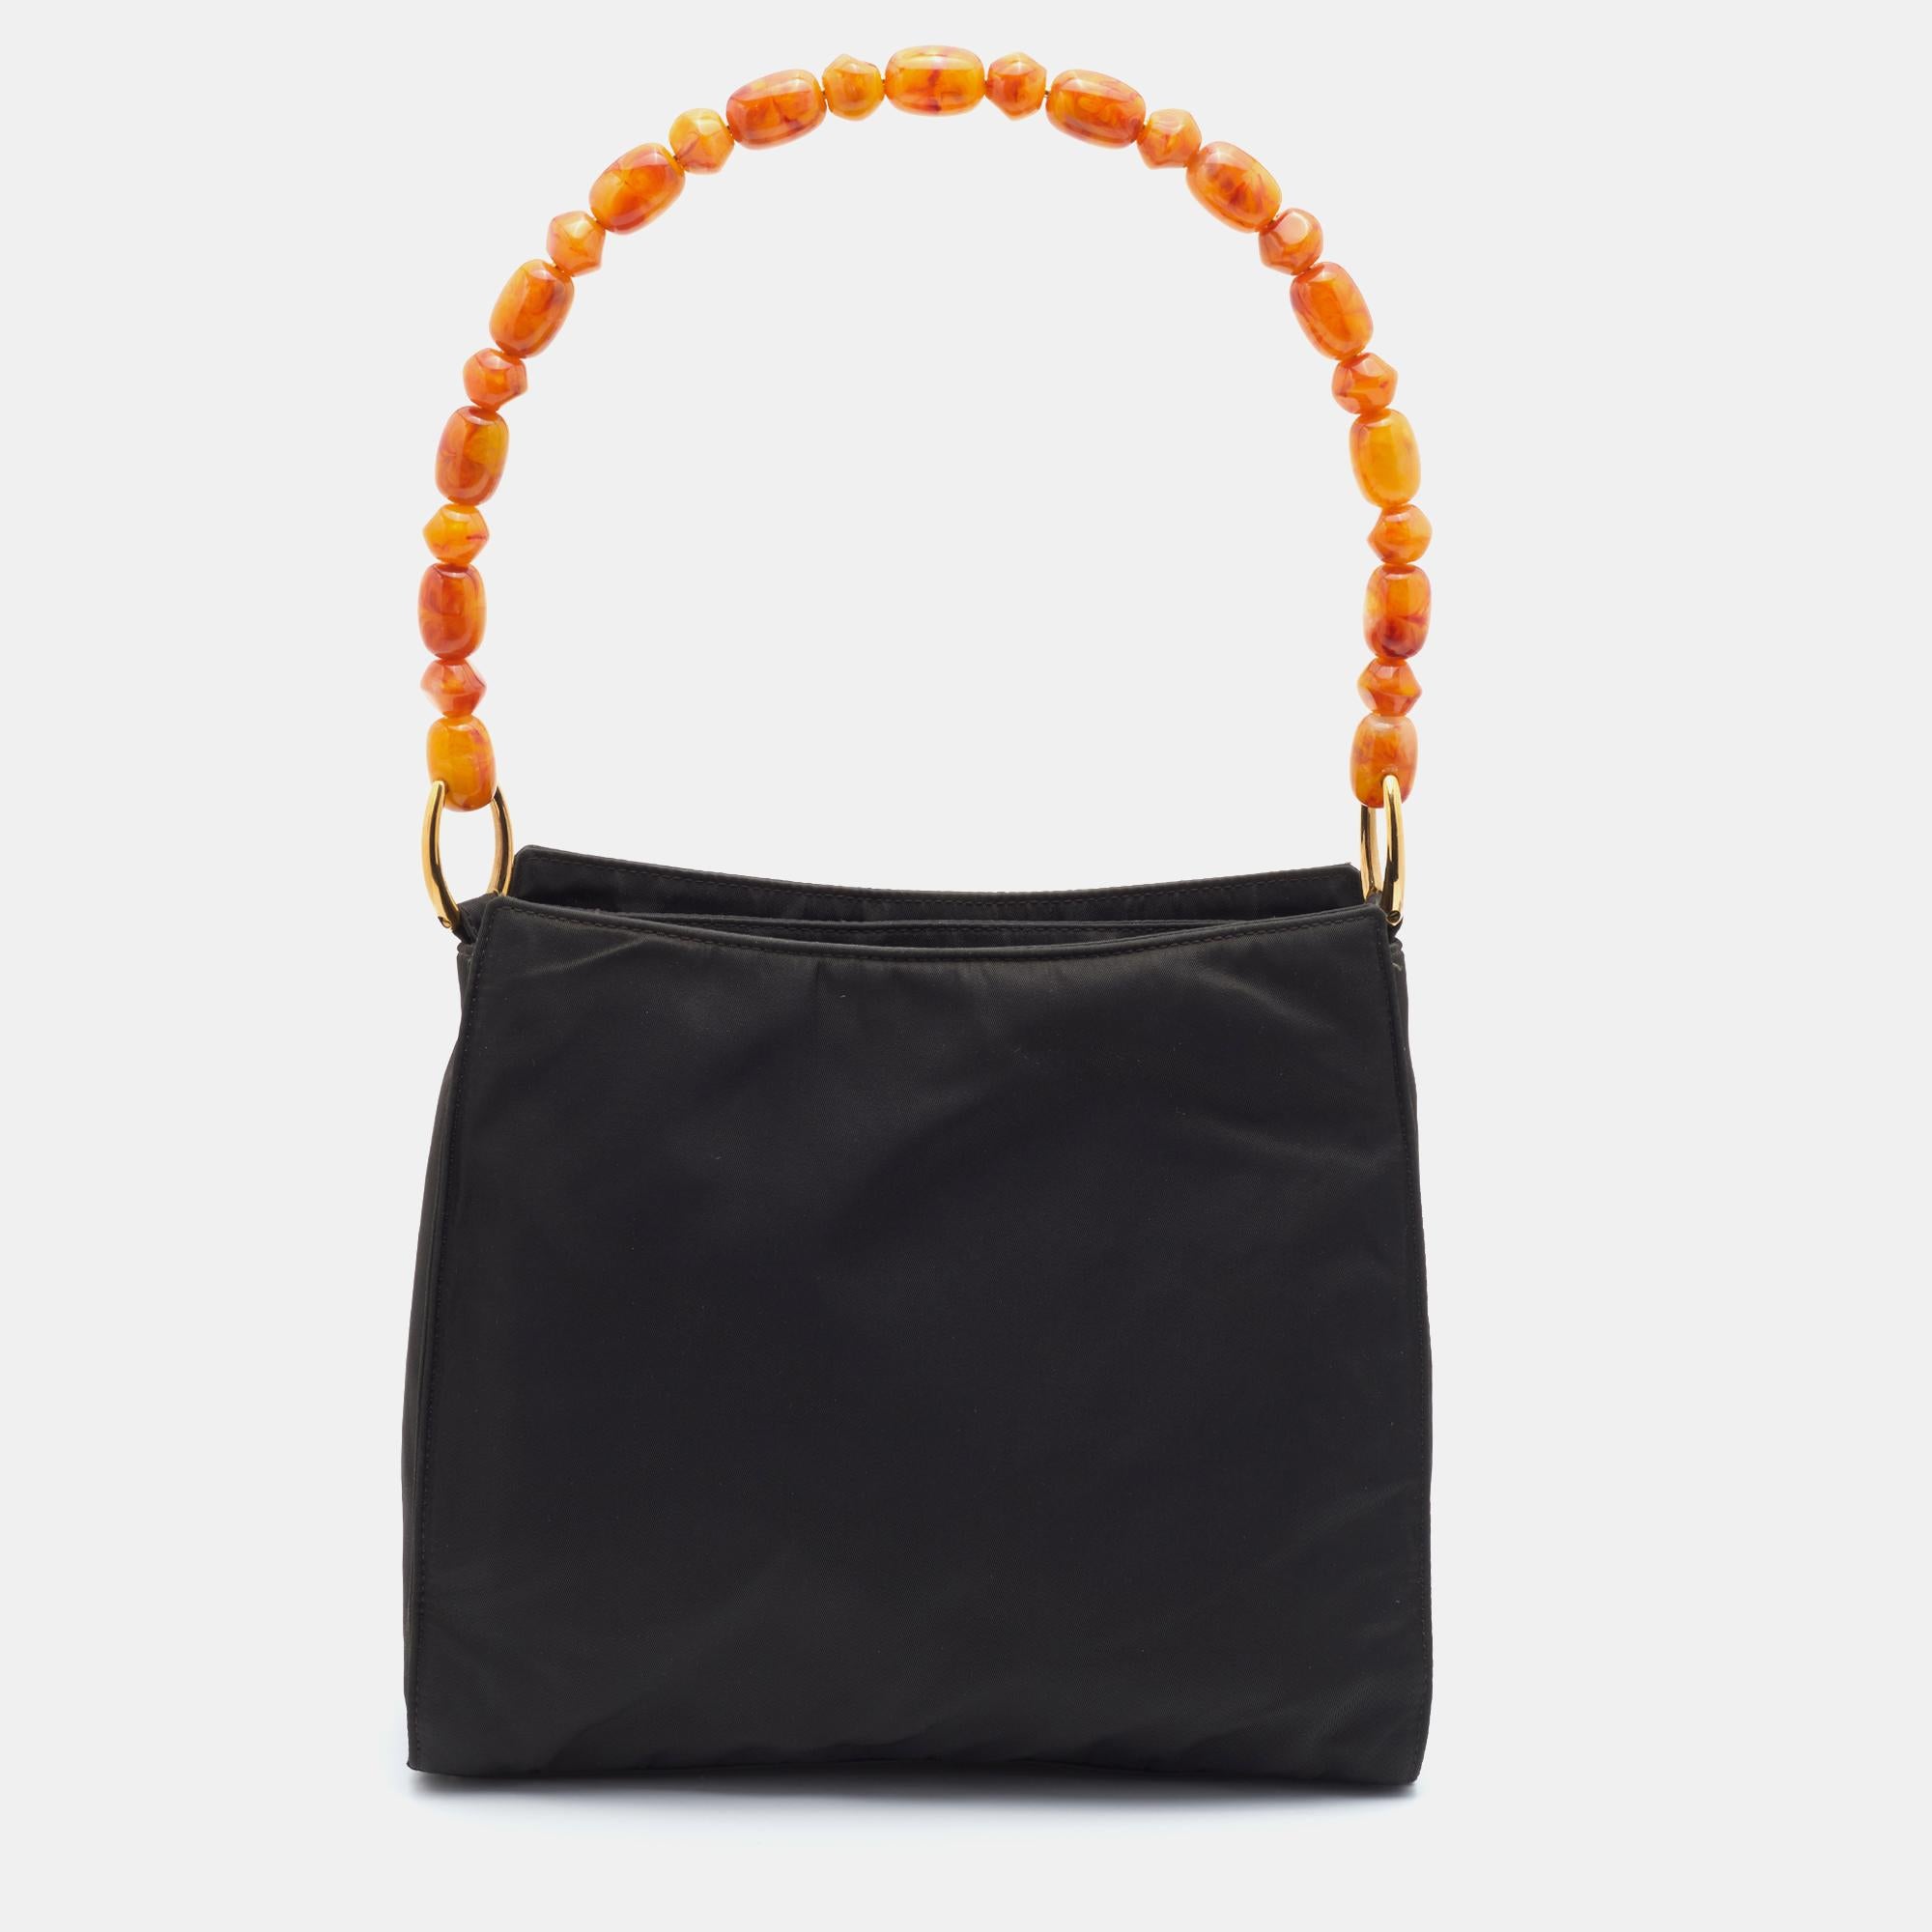 Every well-curated wardrobe deserves a Dior handbag like this one. A practical and elegant everyday bag in black nylon, held by a stunning beaded handle. The spacious interior is lined with fabric.

